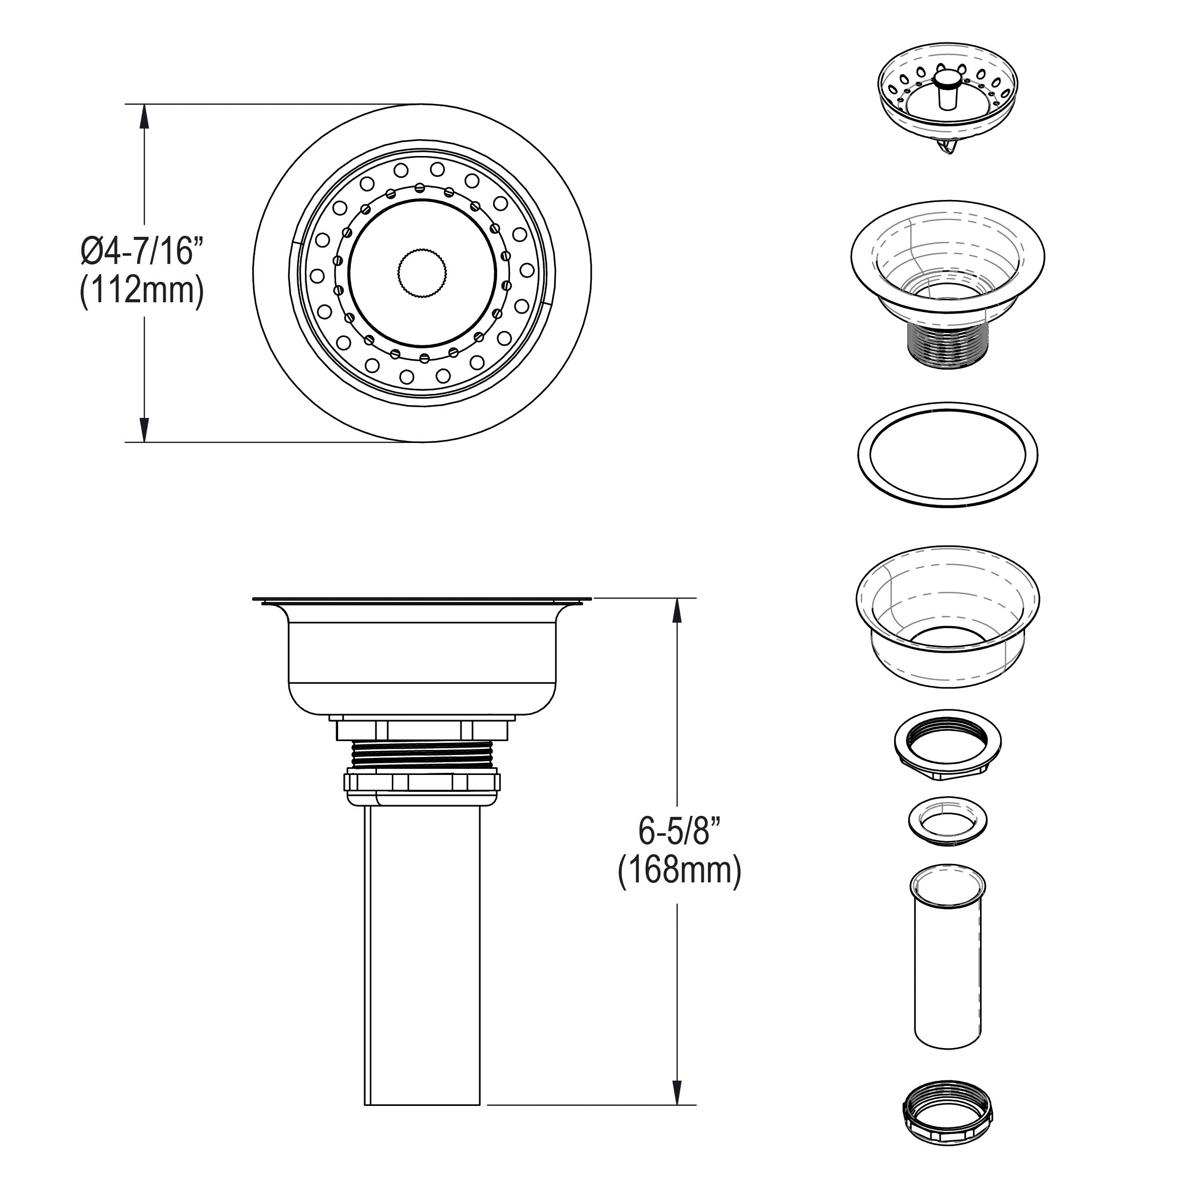 matte drain fitting body with strainer basket